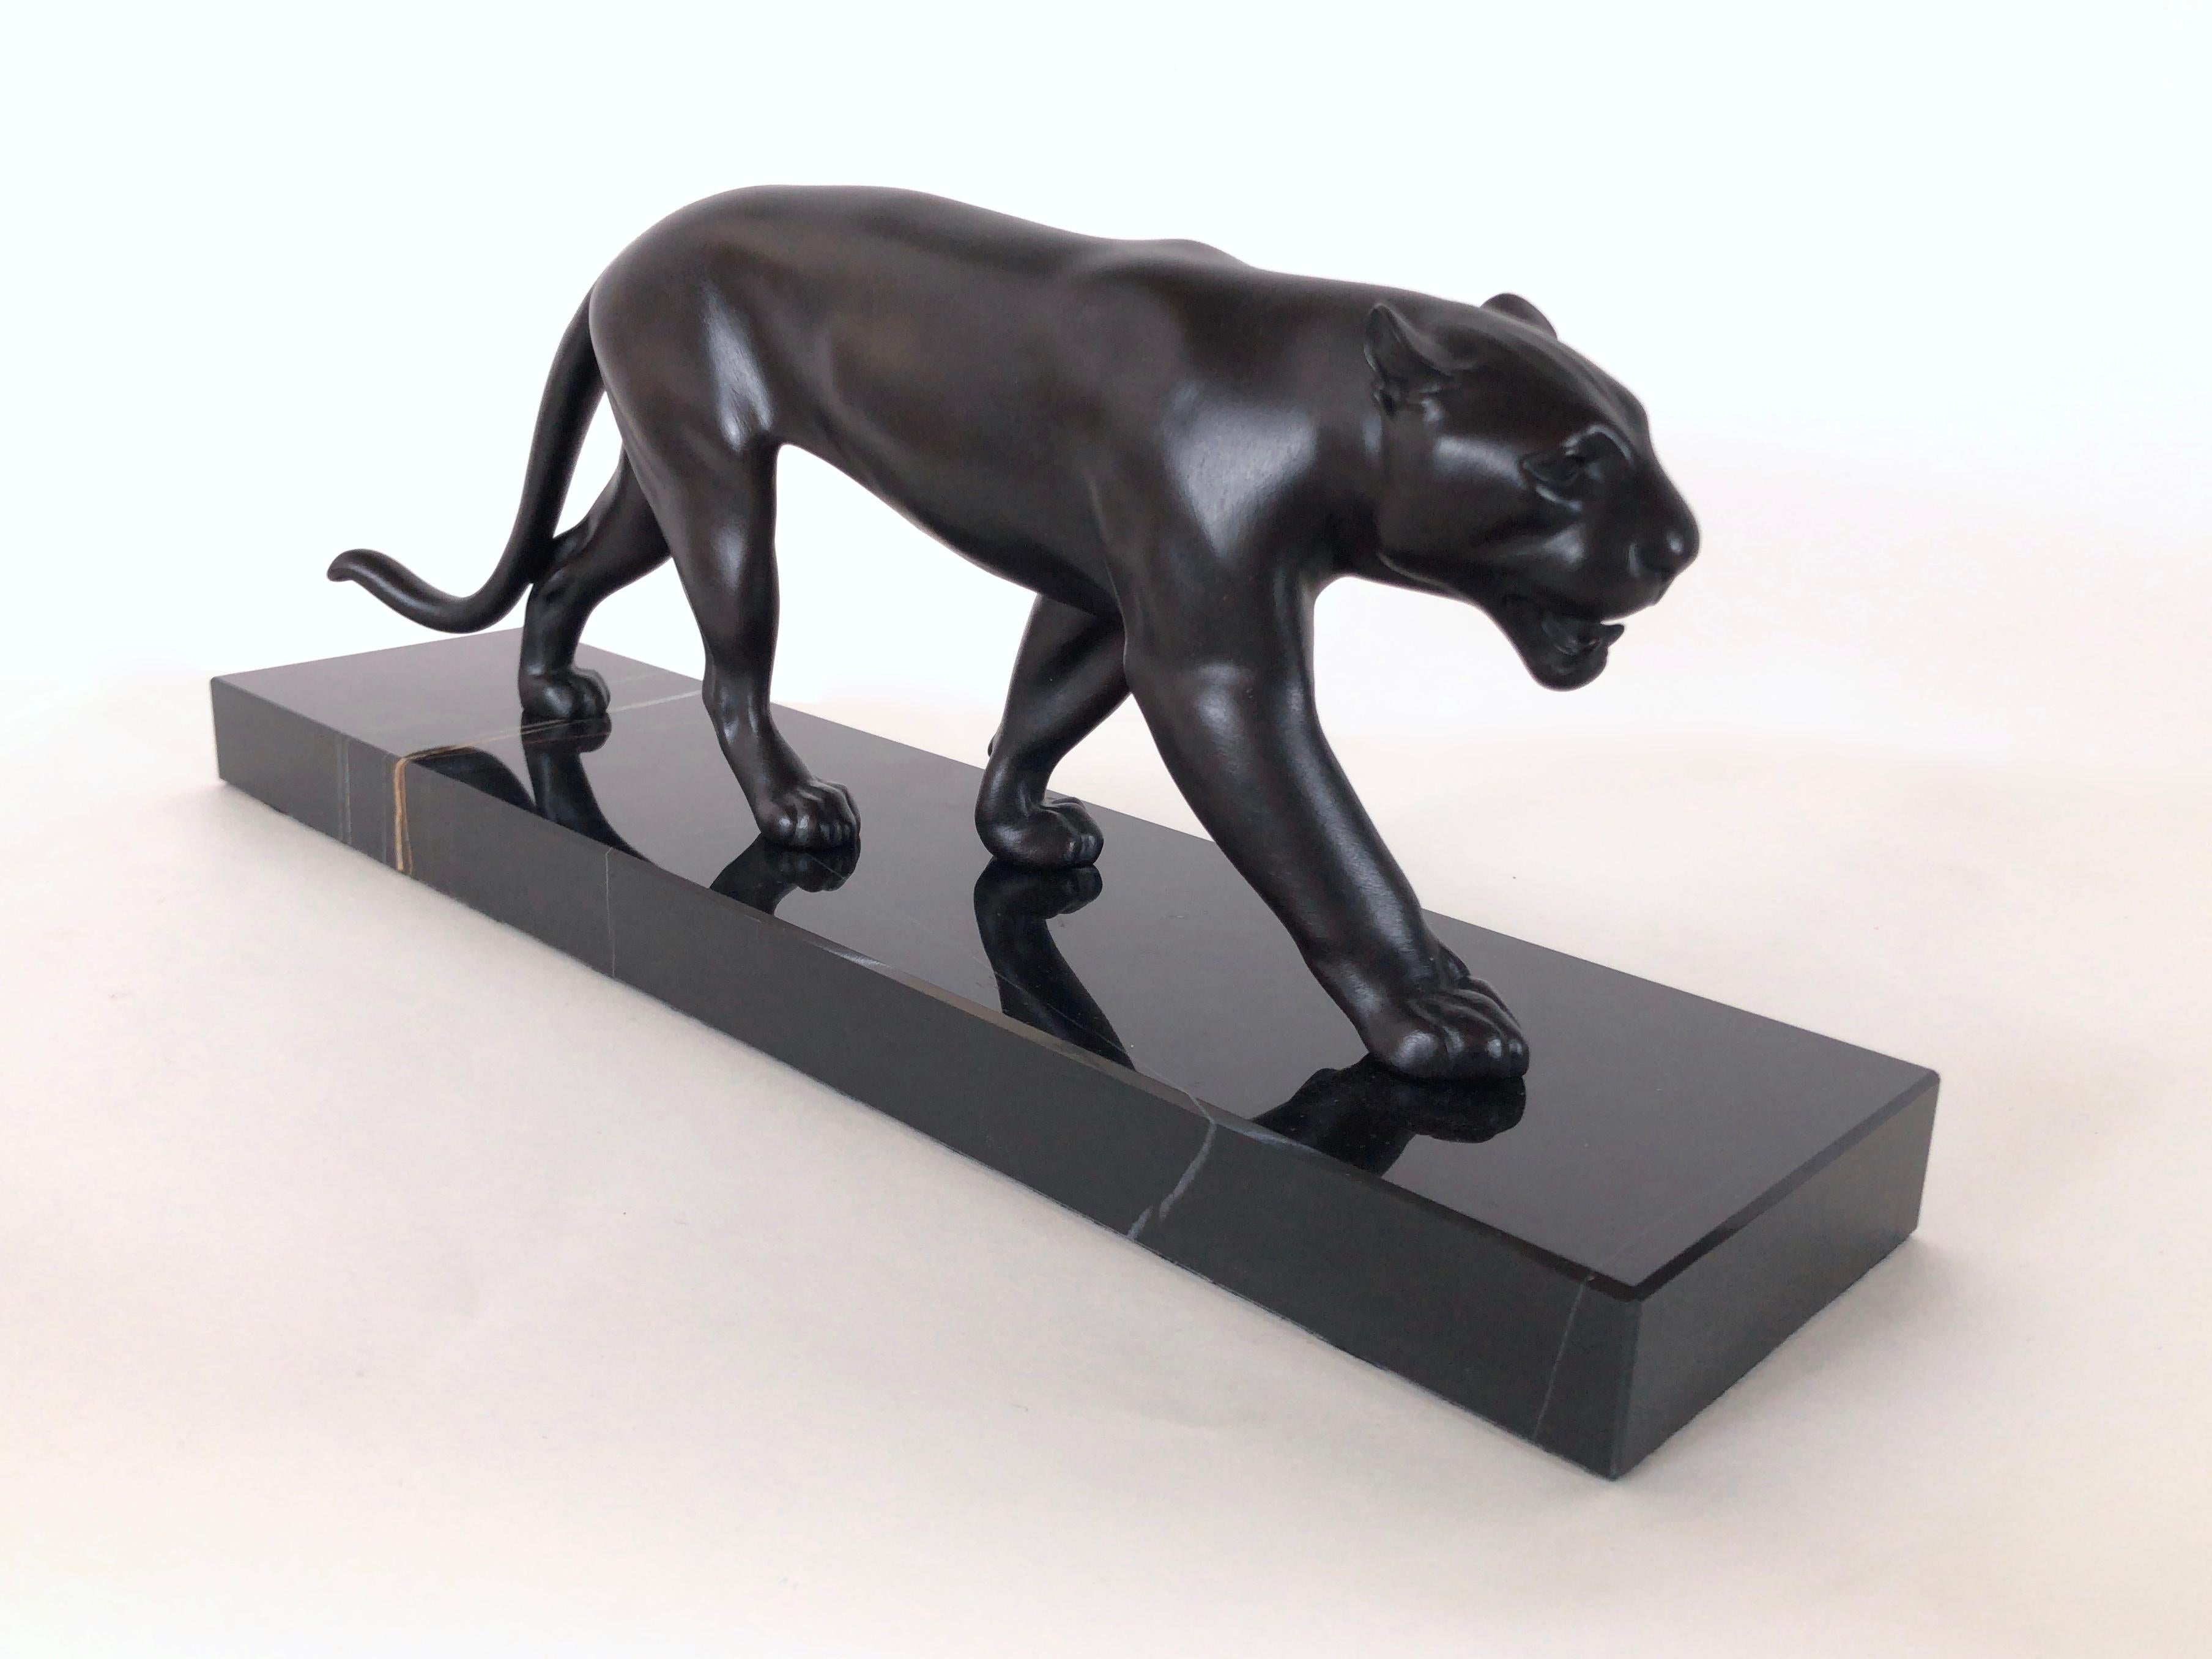 Lion / panther sculpture named “Ouganda”
Original “Max Le Verrier”, signed
Designed in France during the roaring 1920s by “Max Le Verrier” (1891-1973)
Art Deco style, France 

Materials: patinated spelter (French: régule), marble base 
Socle